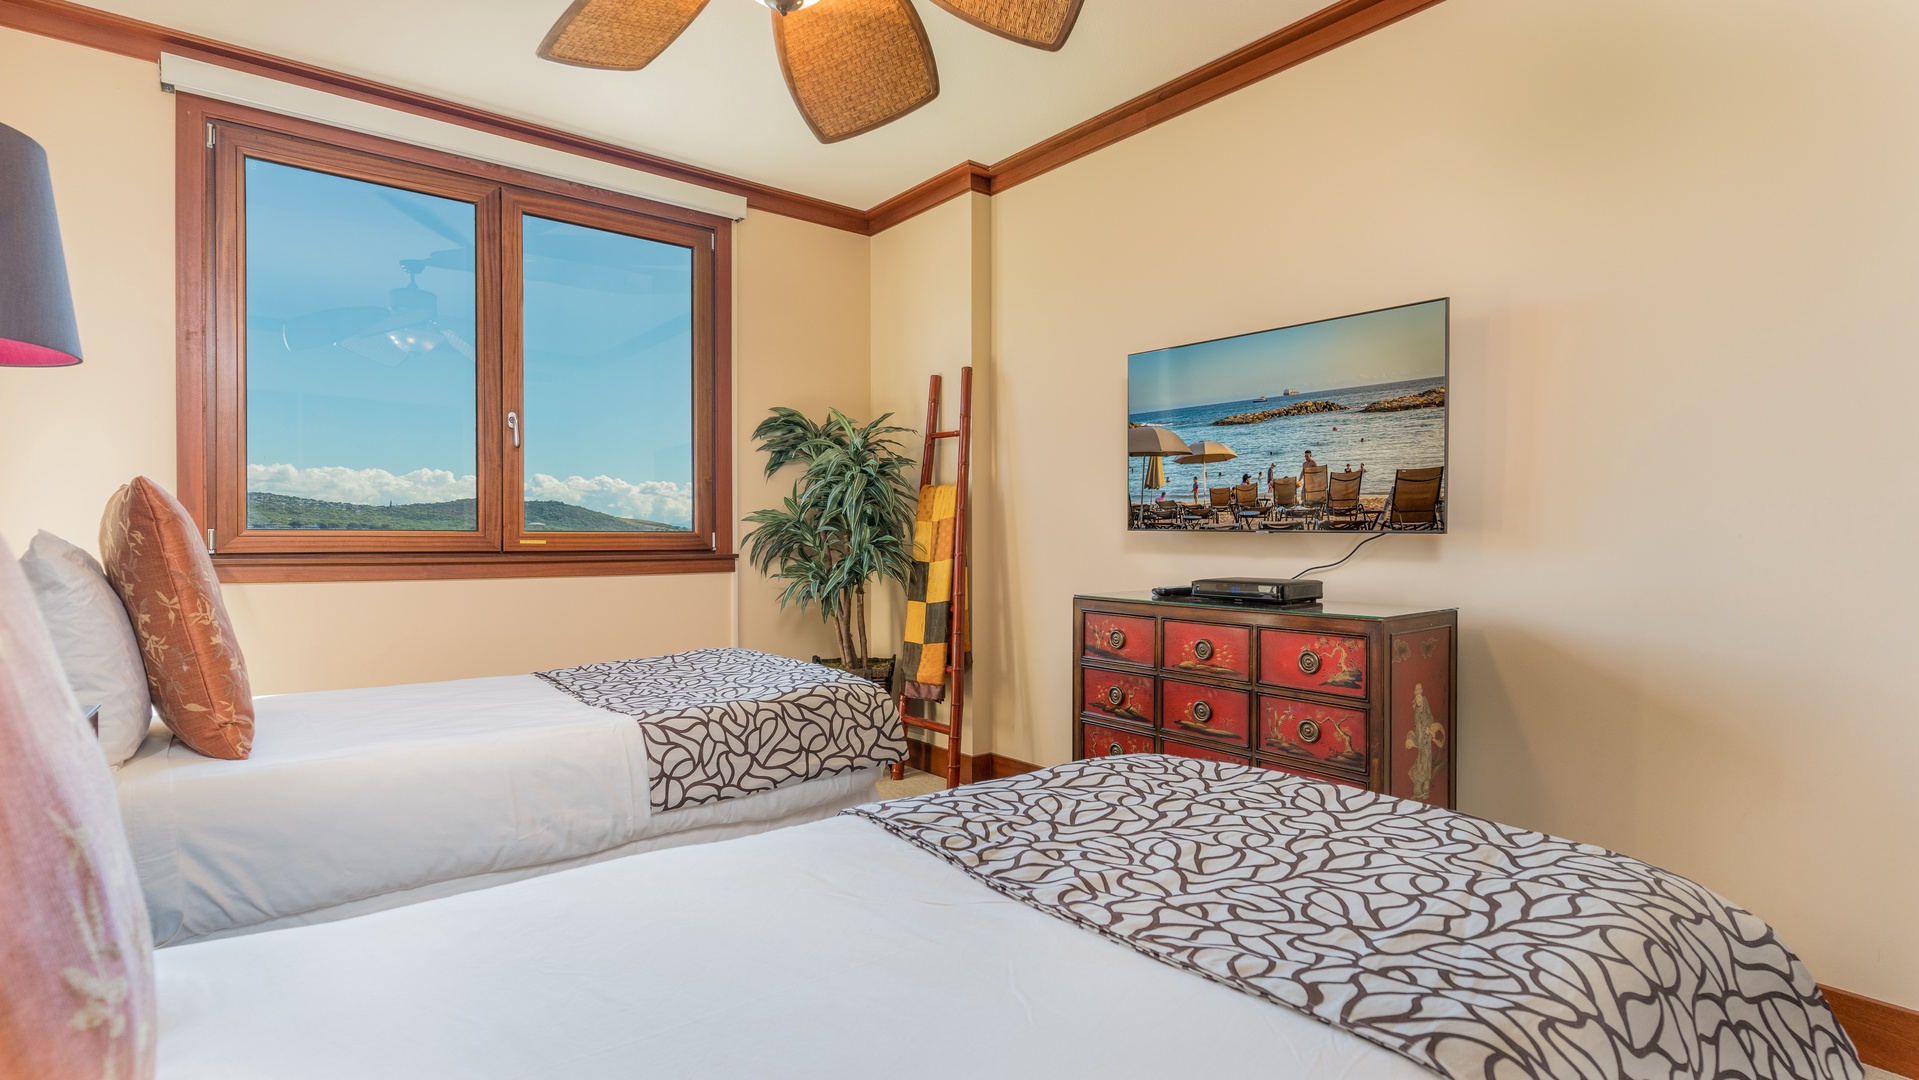 Kapolei Vacation Rentals, Ko Olina Beach Villas O905 - The third guest bedroom also features TV and storage space.